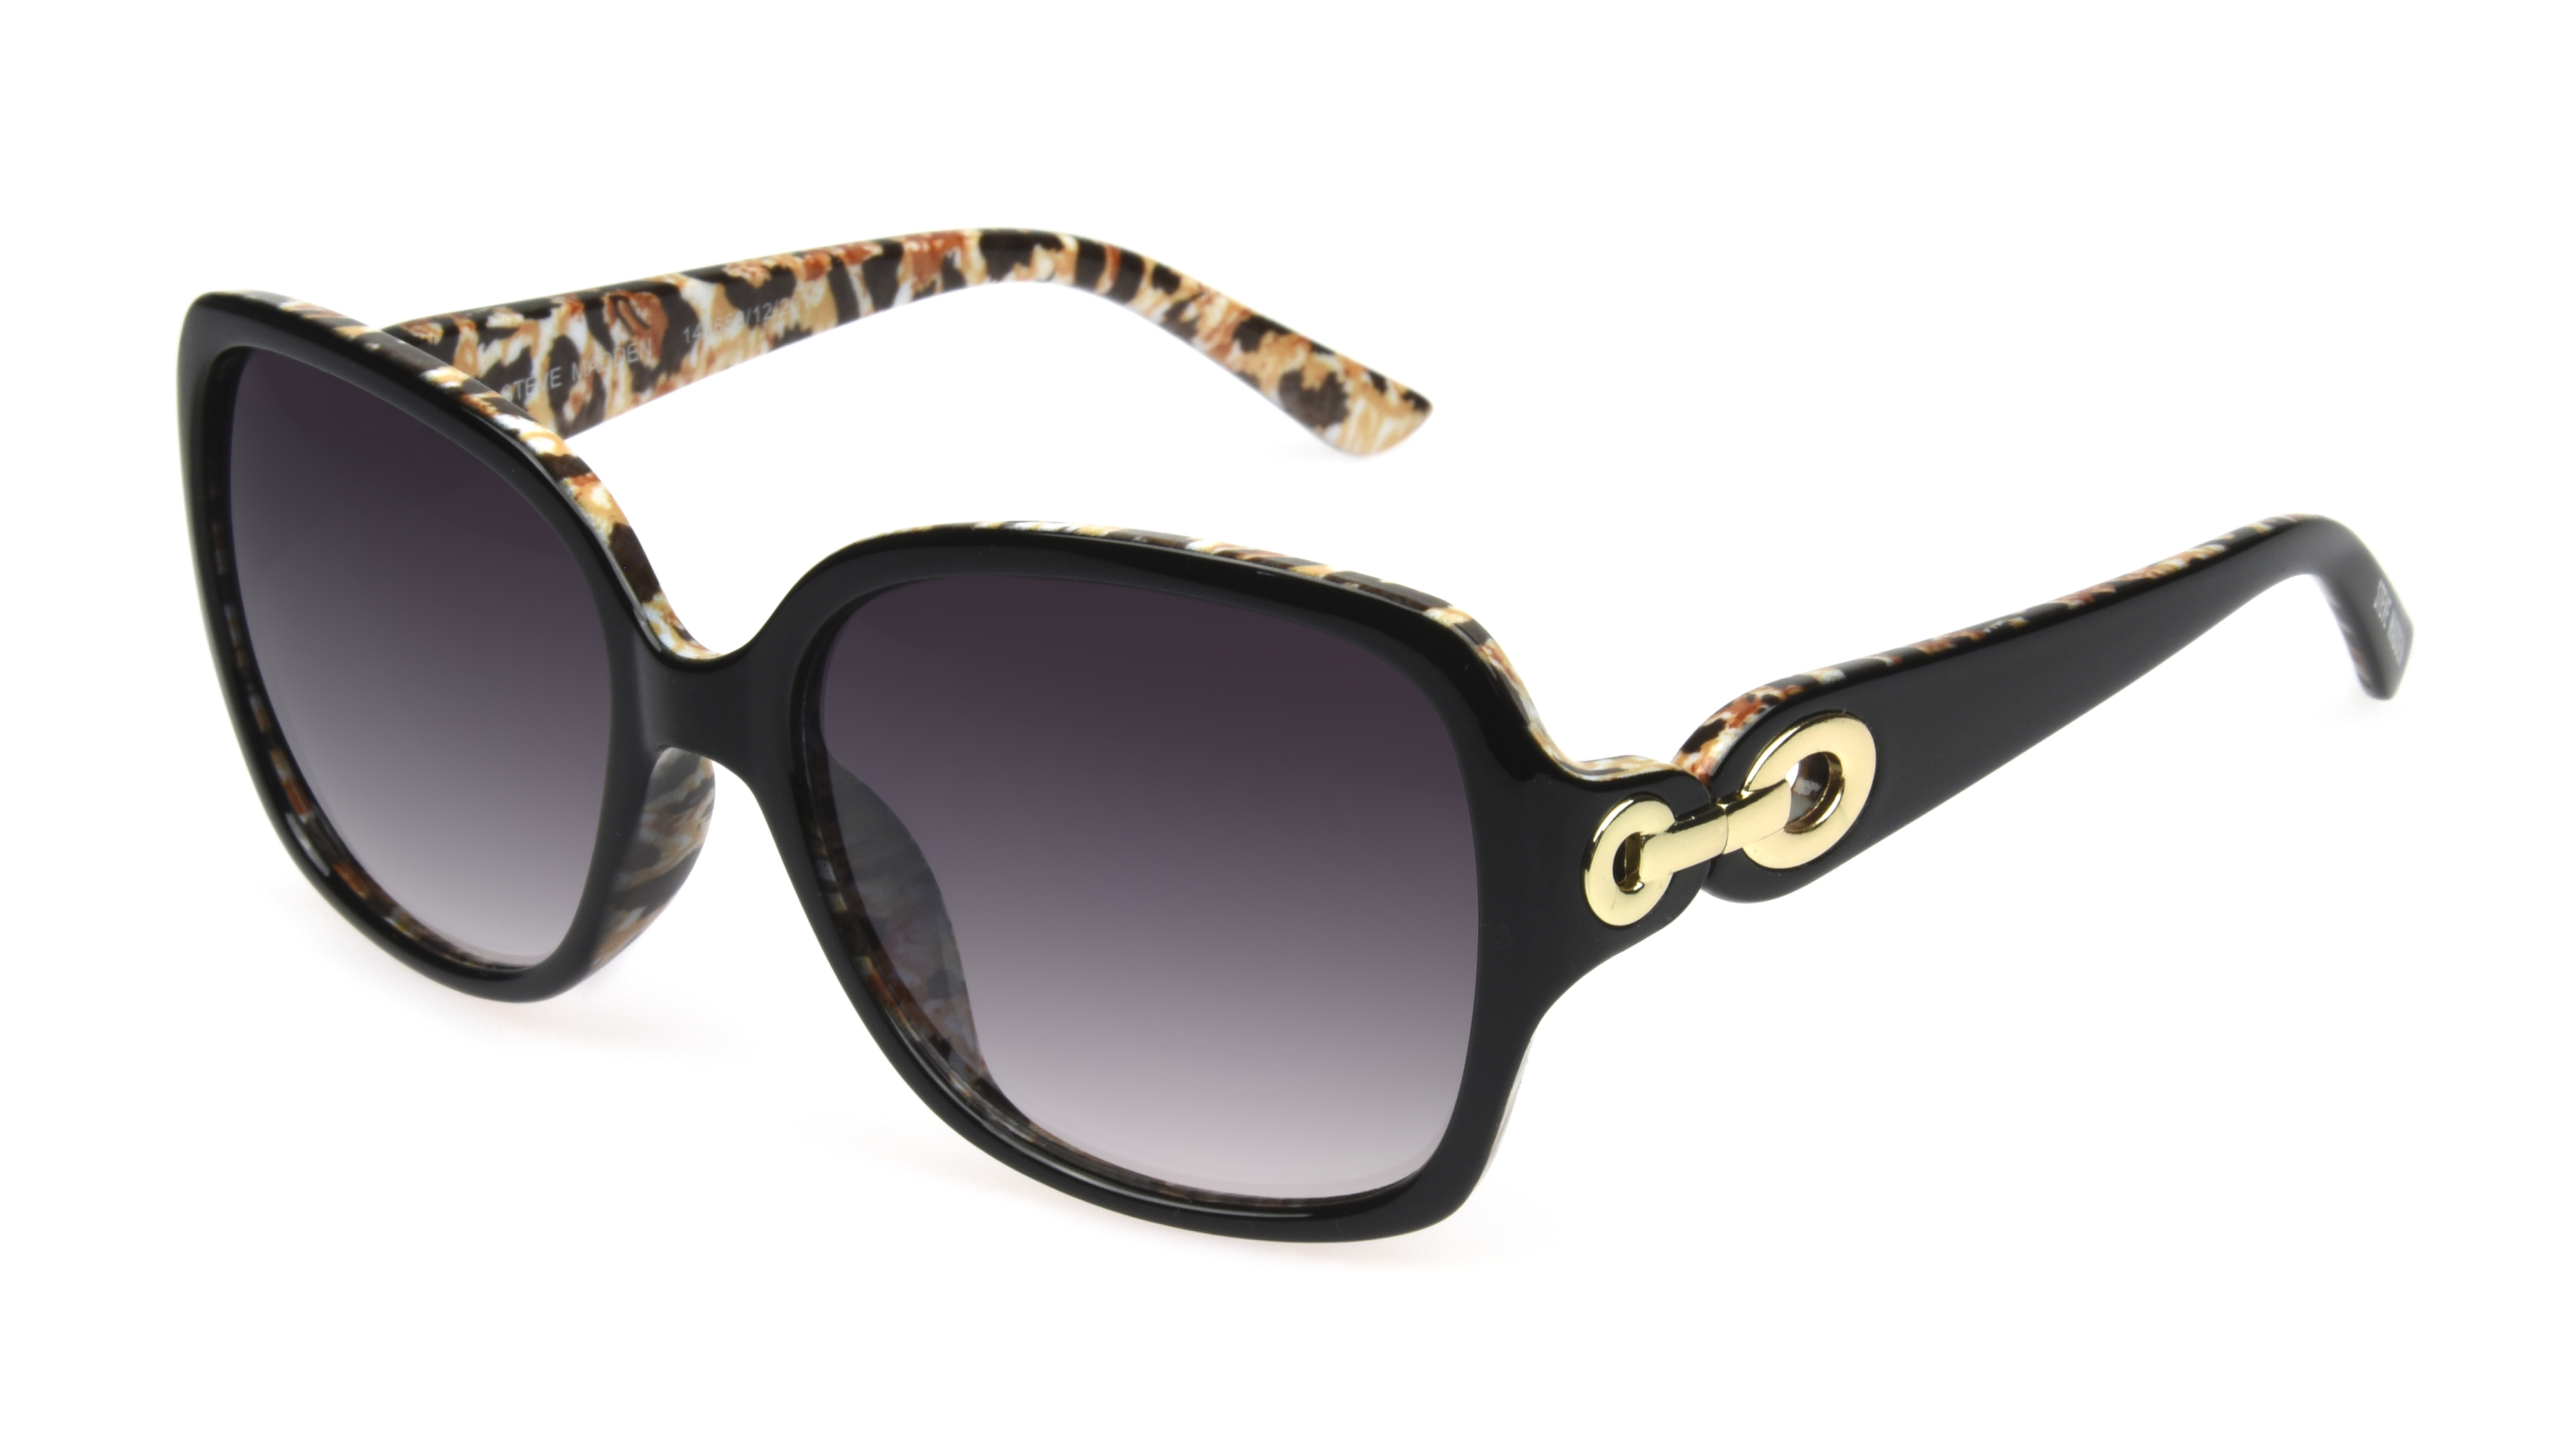 Steve Madden Adult Female Square Sunglasses with Gold Chain - image 2 of 3